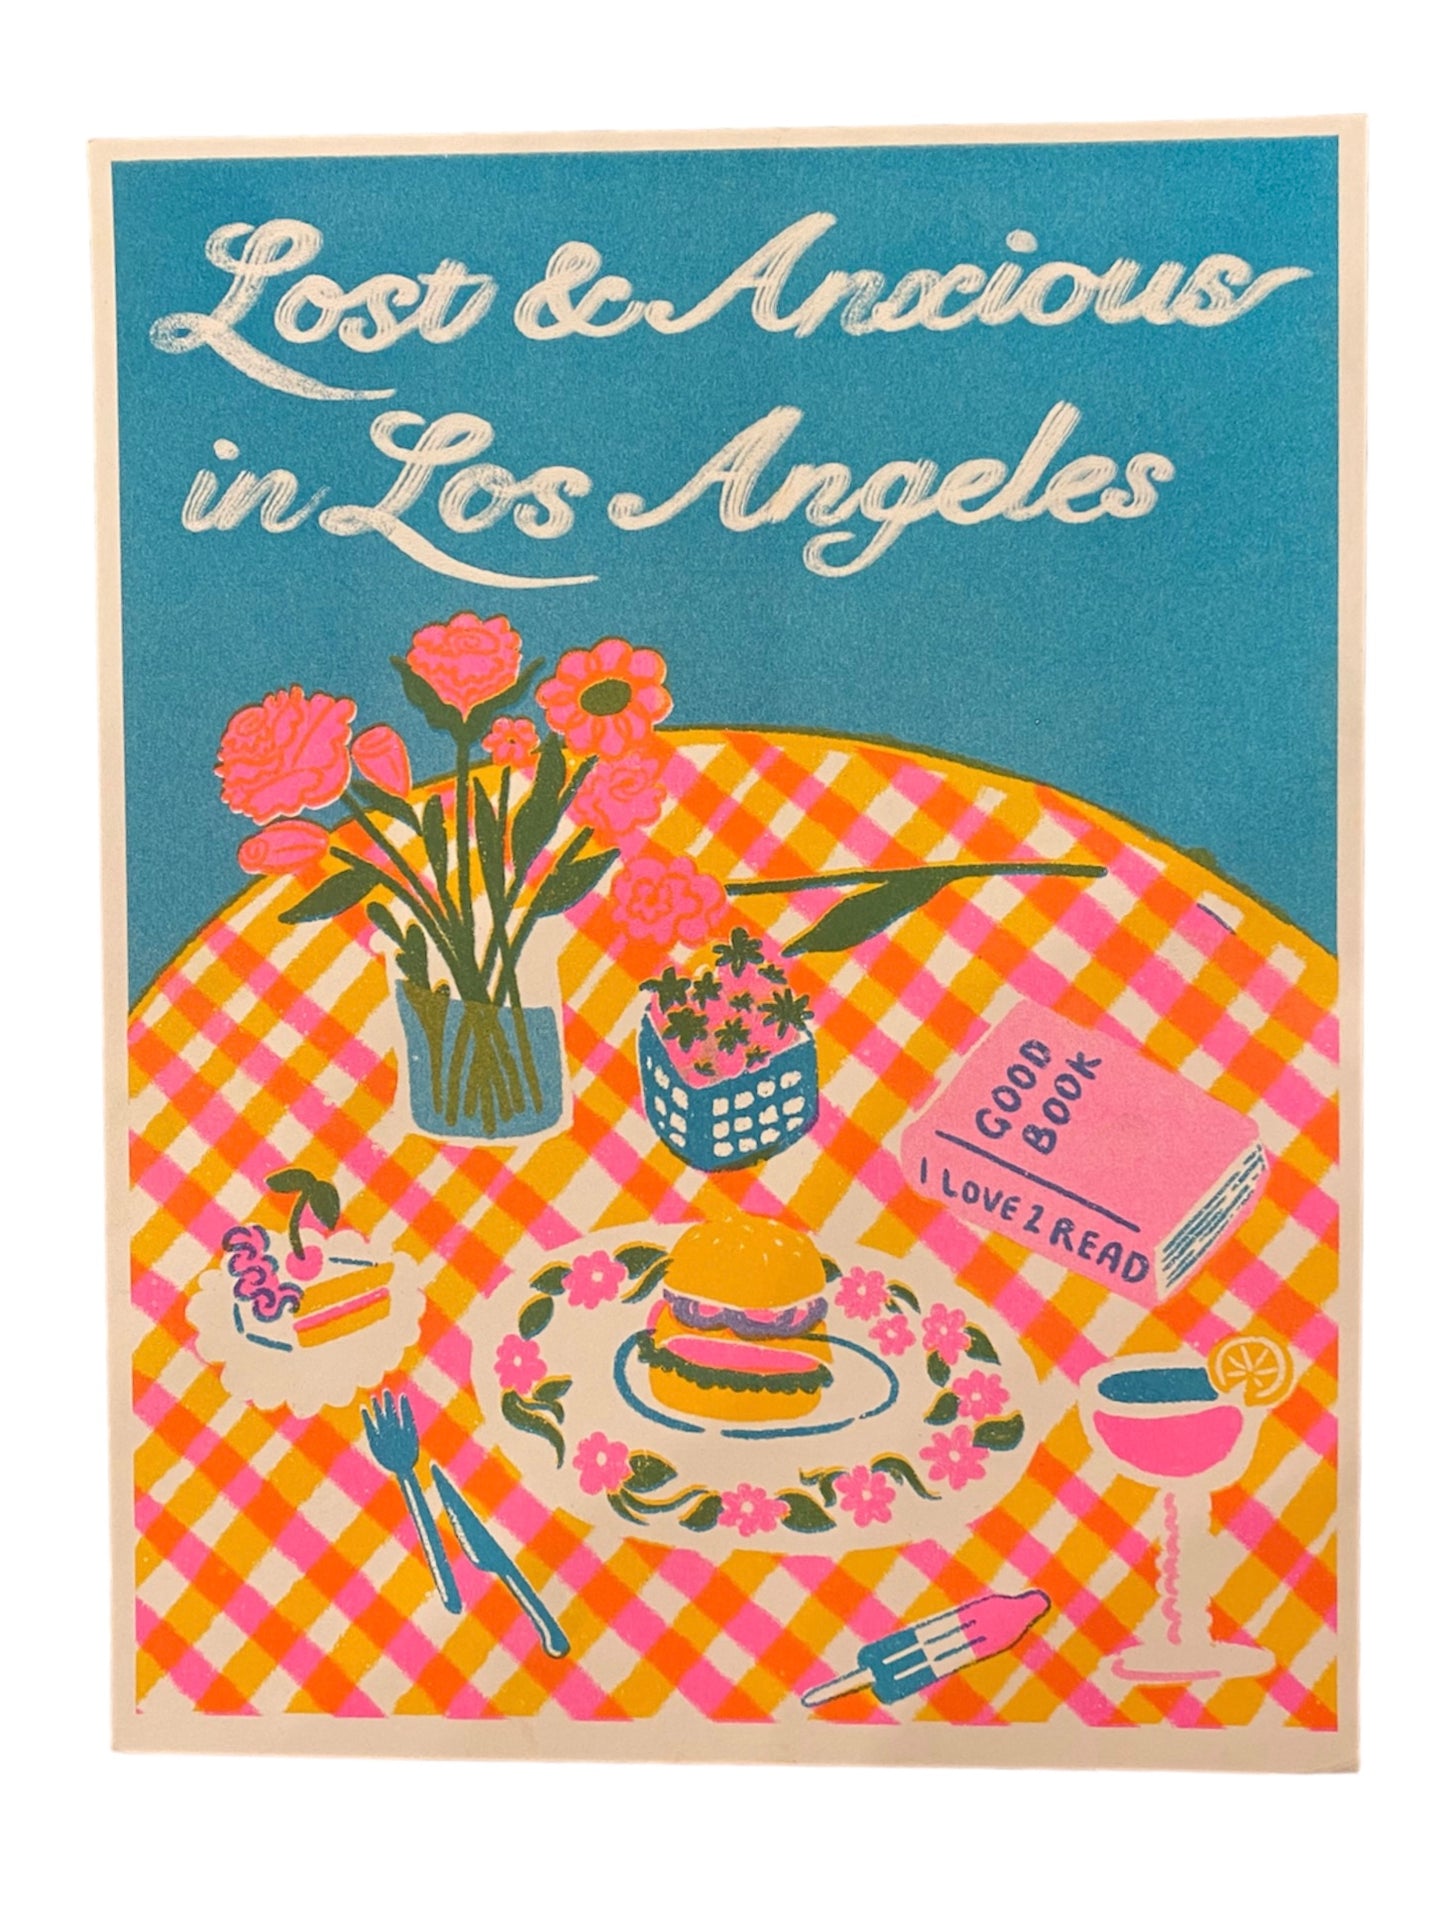 Handmade ‘Lost & Anxious’ Risograph Print by Stoopid Chic